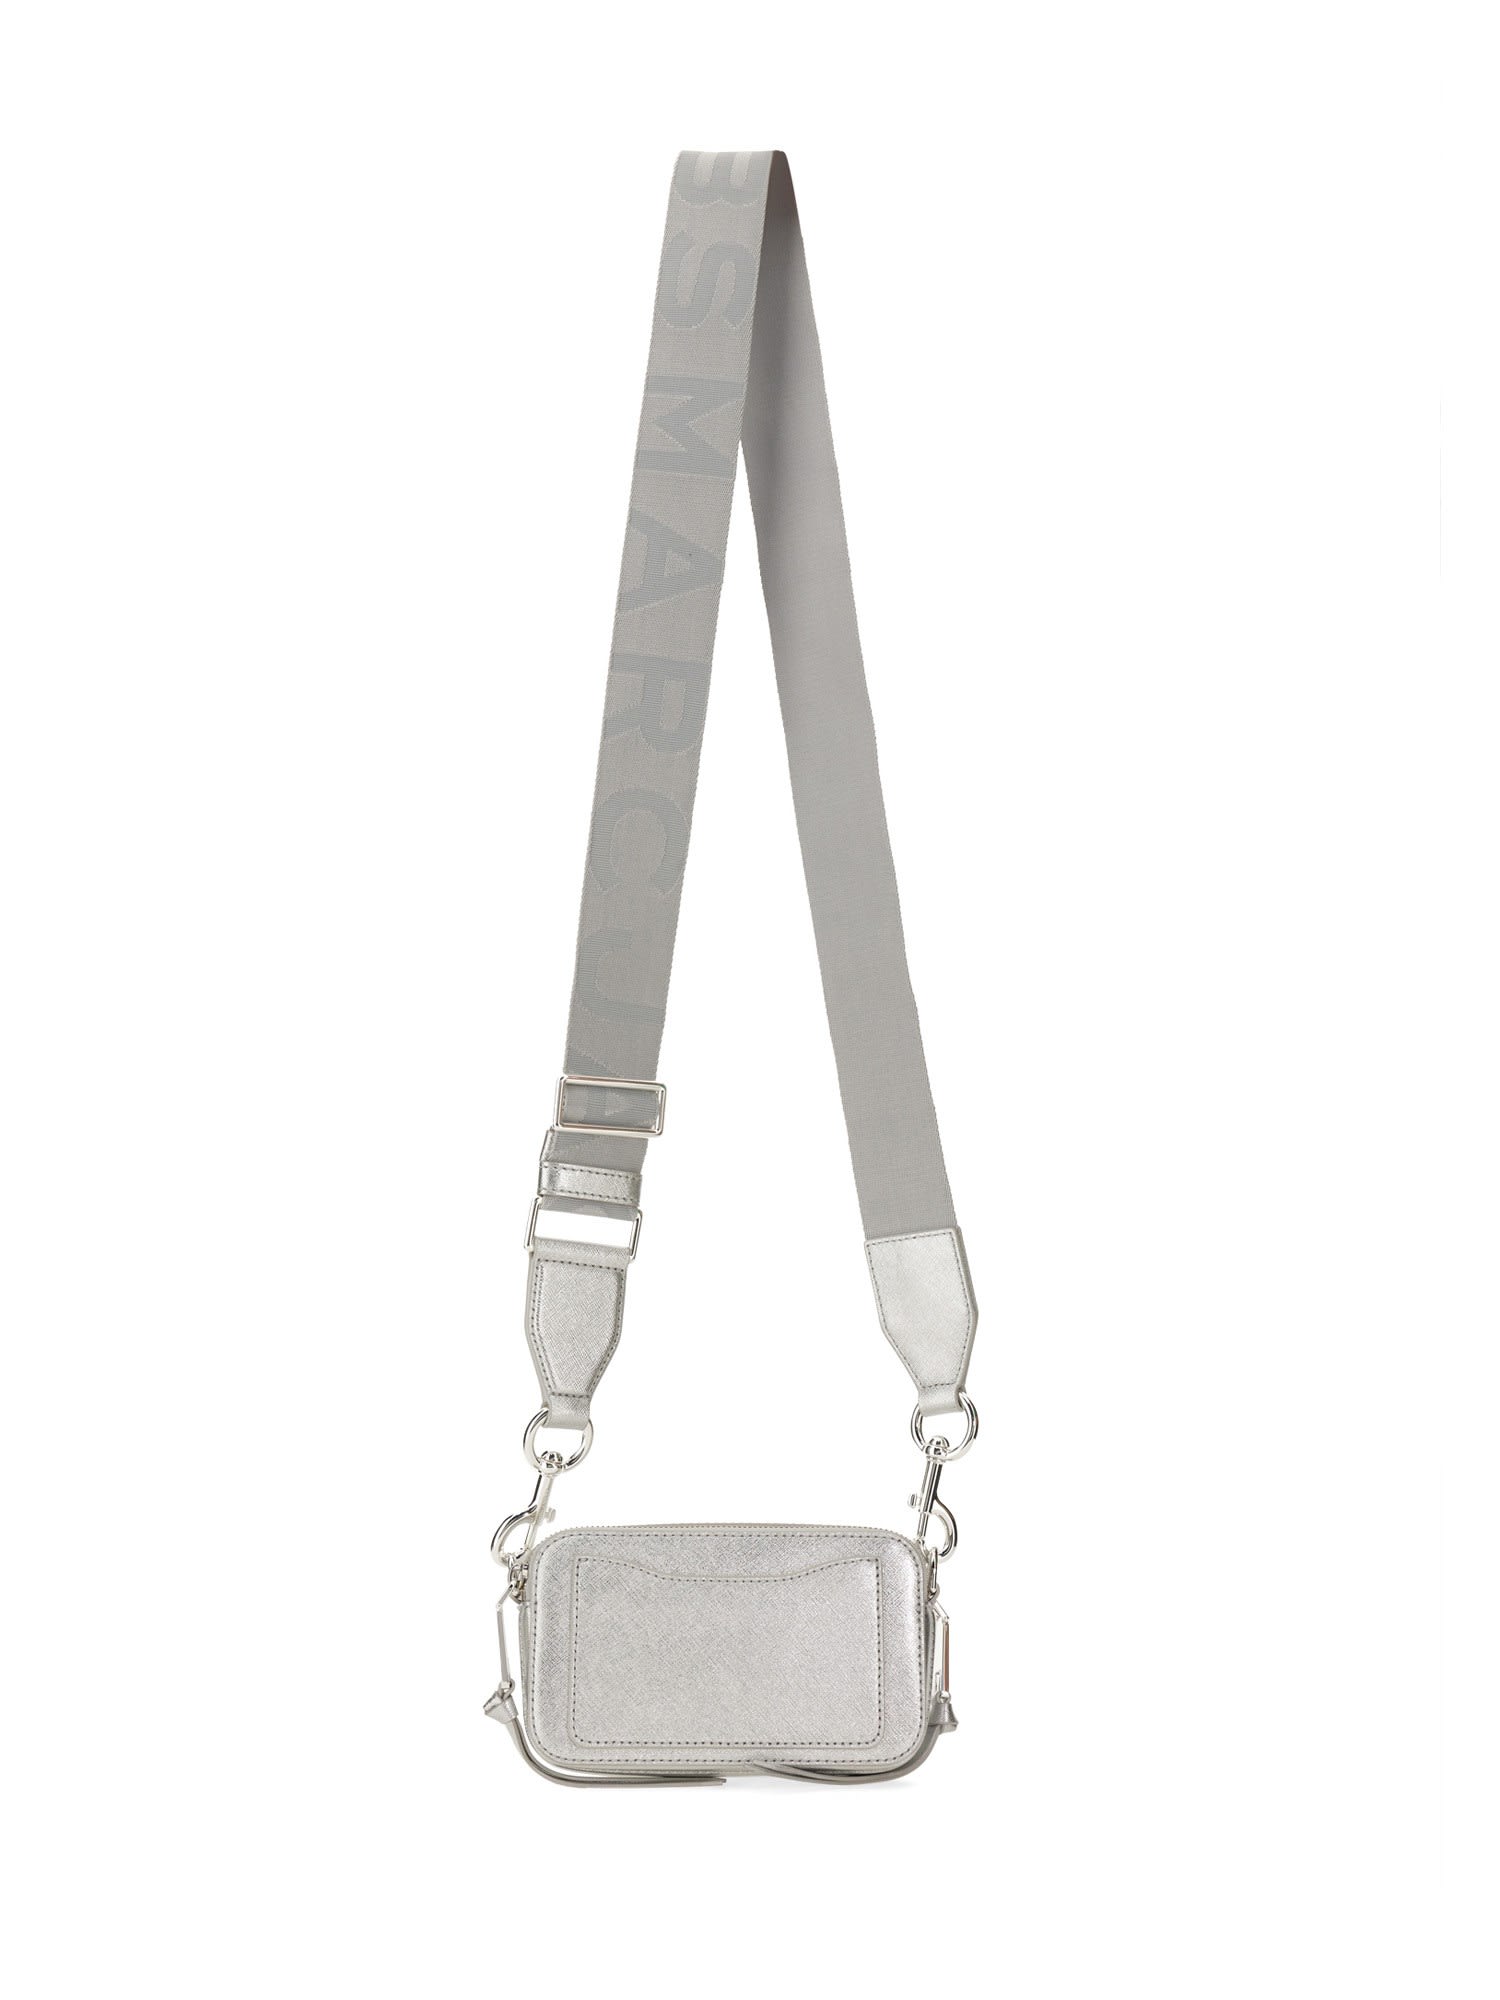 Marc Jacobs The Snapshot Dtm Sunkissed Crossbody Bag in Pink